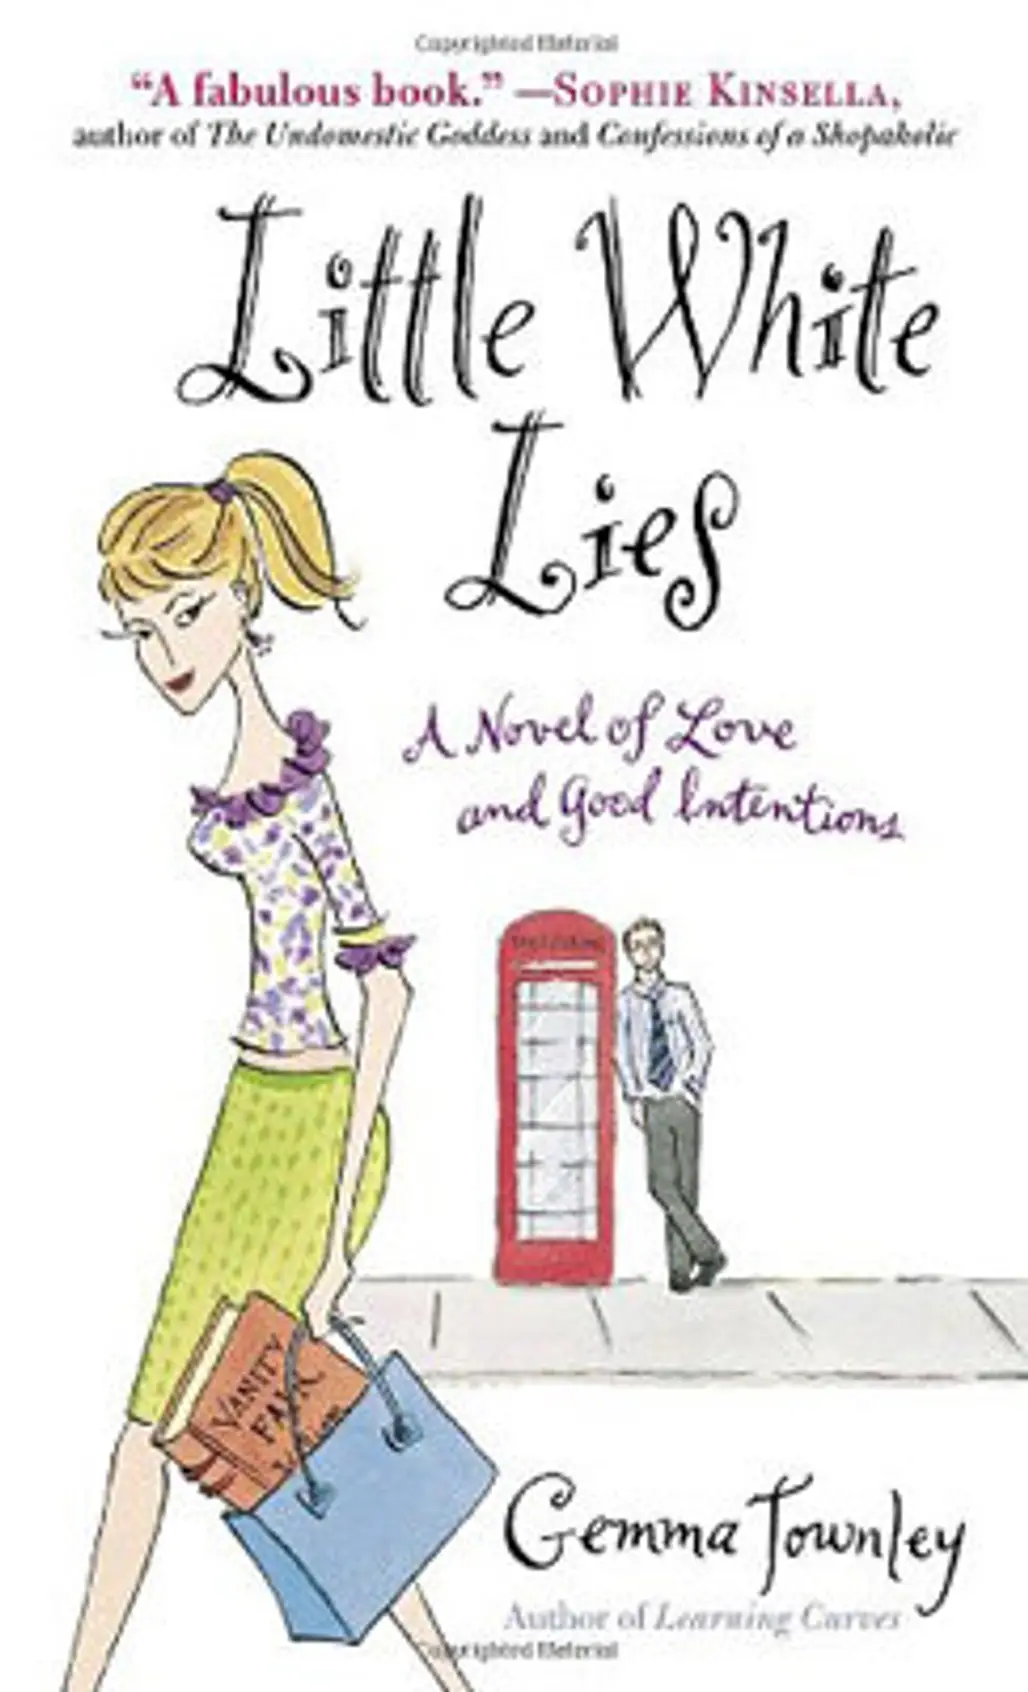 Little White Lies: a Novel of Love and Good Intentions by Gemma Townley